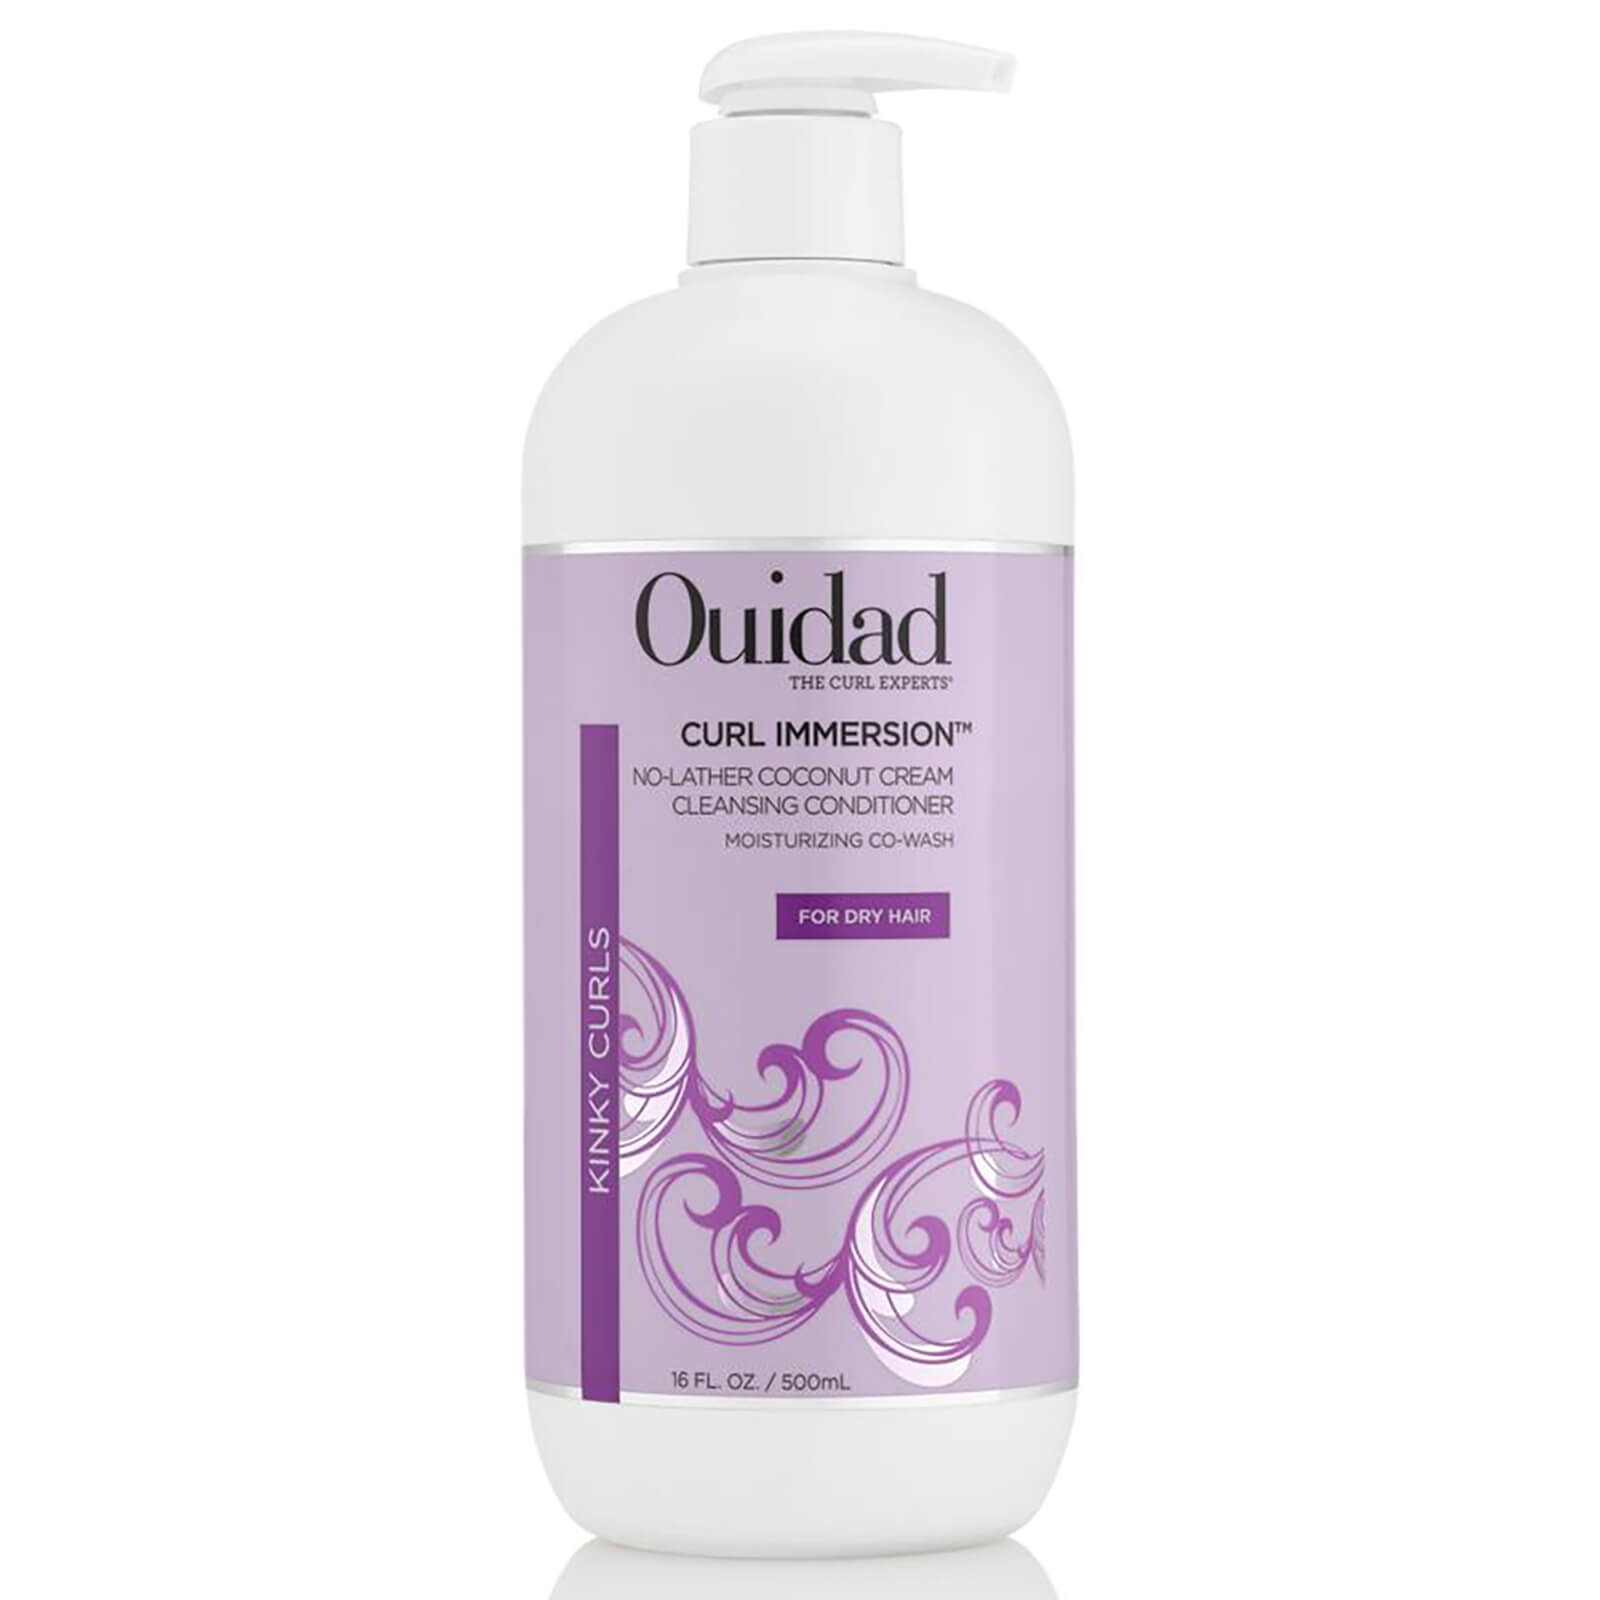 OUIDAD CURL IMMERSION NO-LATHER COCONUT CREAM CLEANSING CONDITIONER 500ML,97416